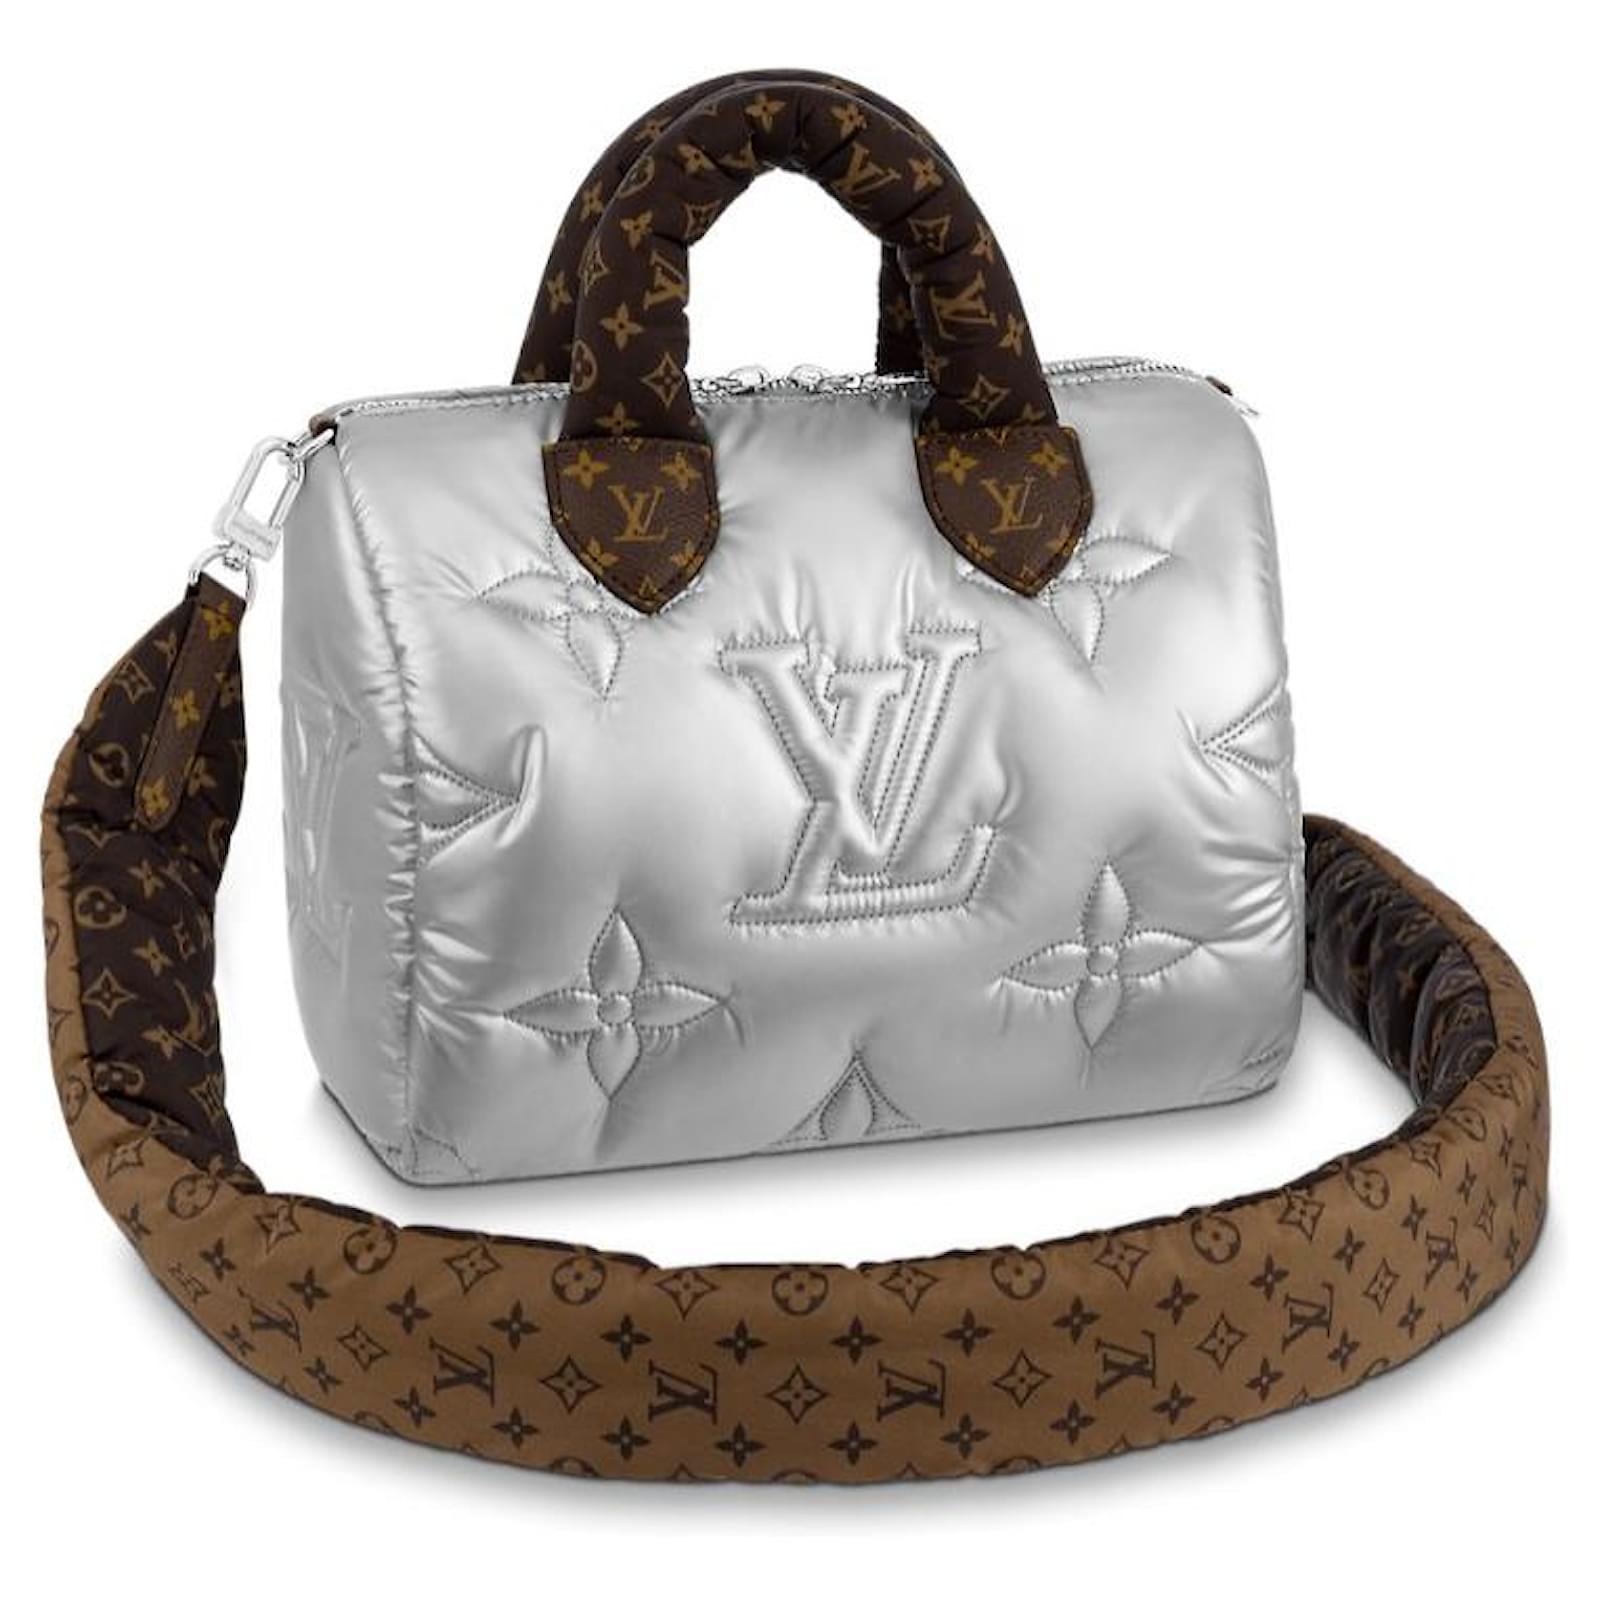 Recycled Louis Vuitton Leather